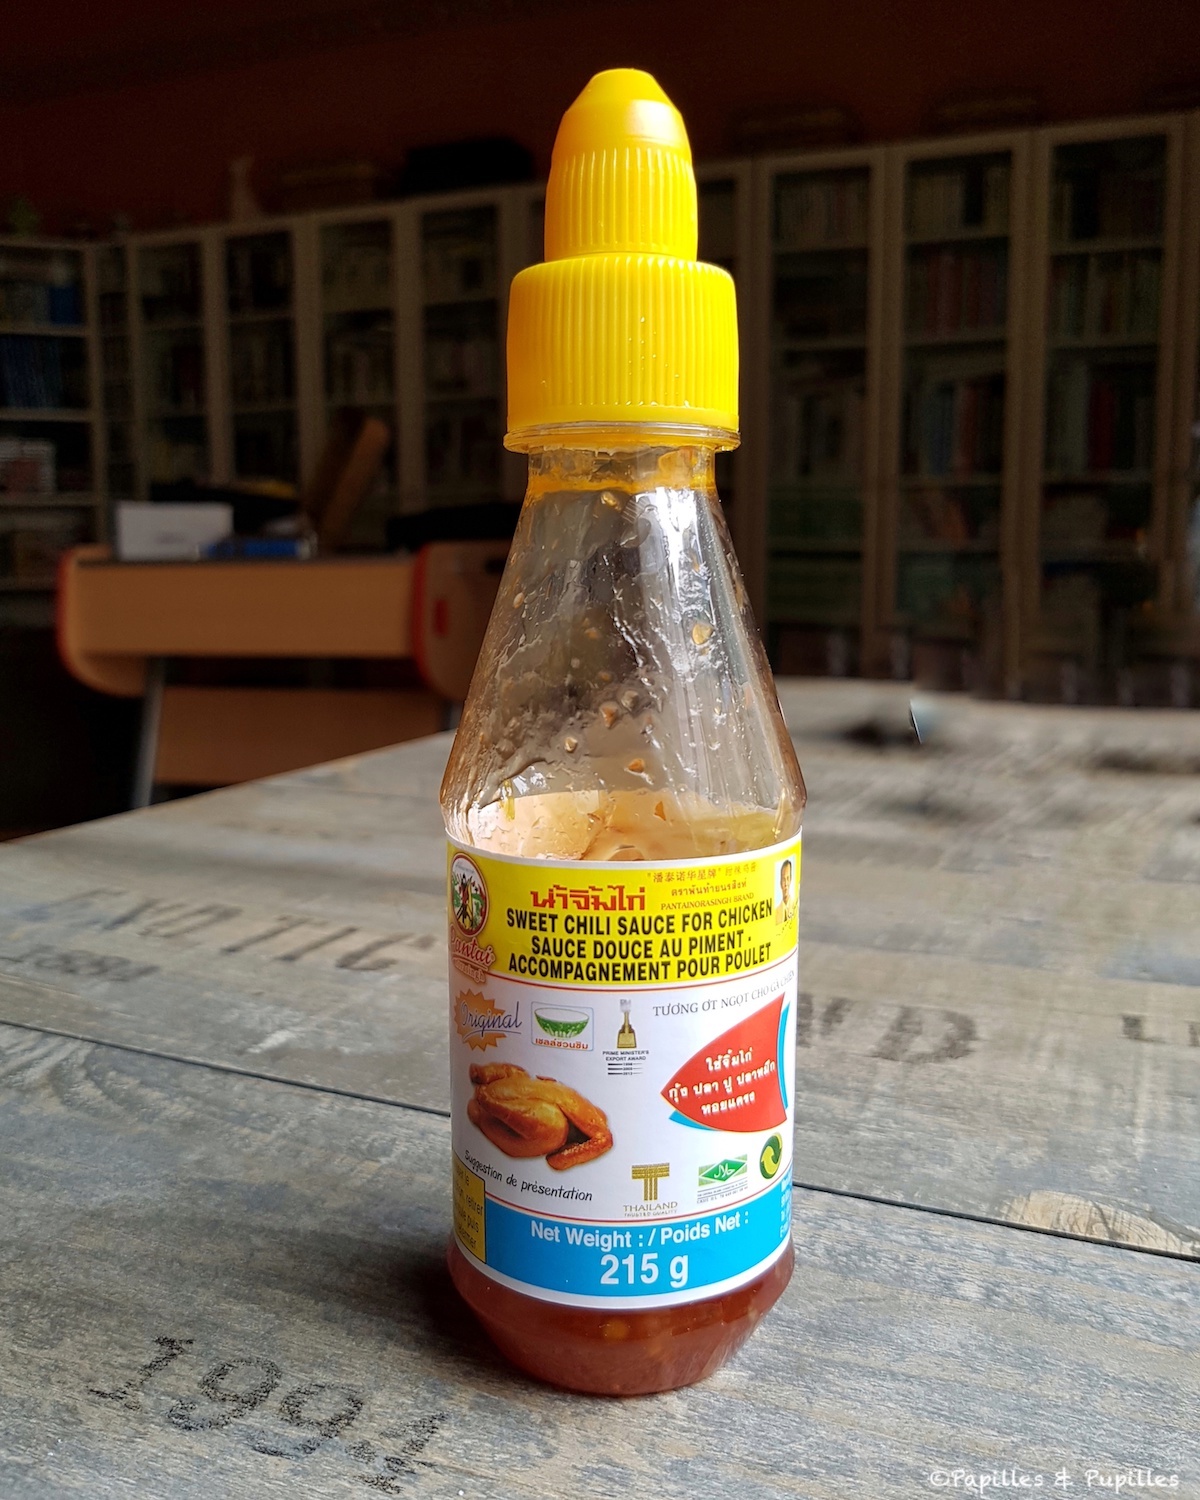 Sweet chili sauce for chicken